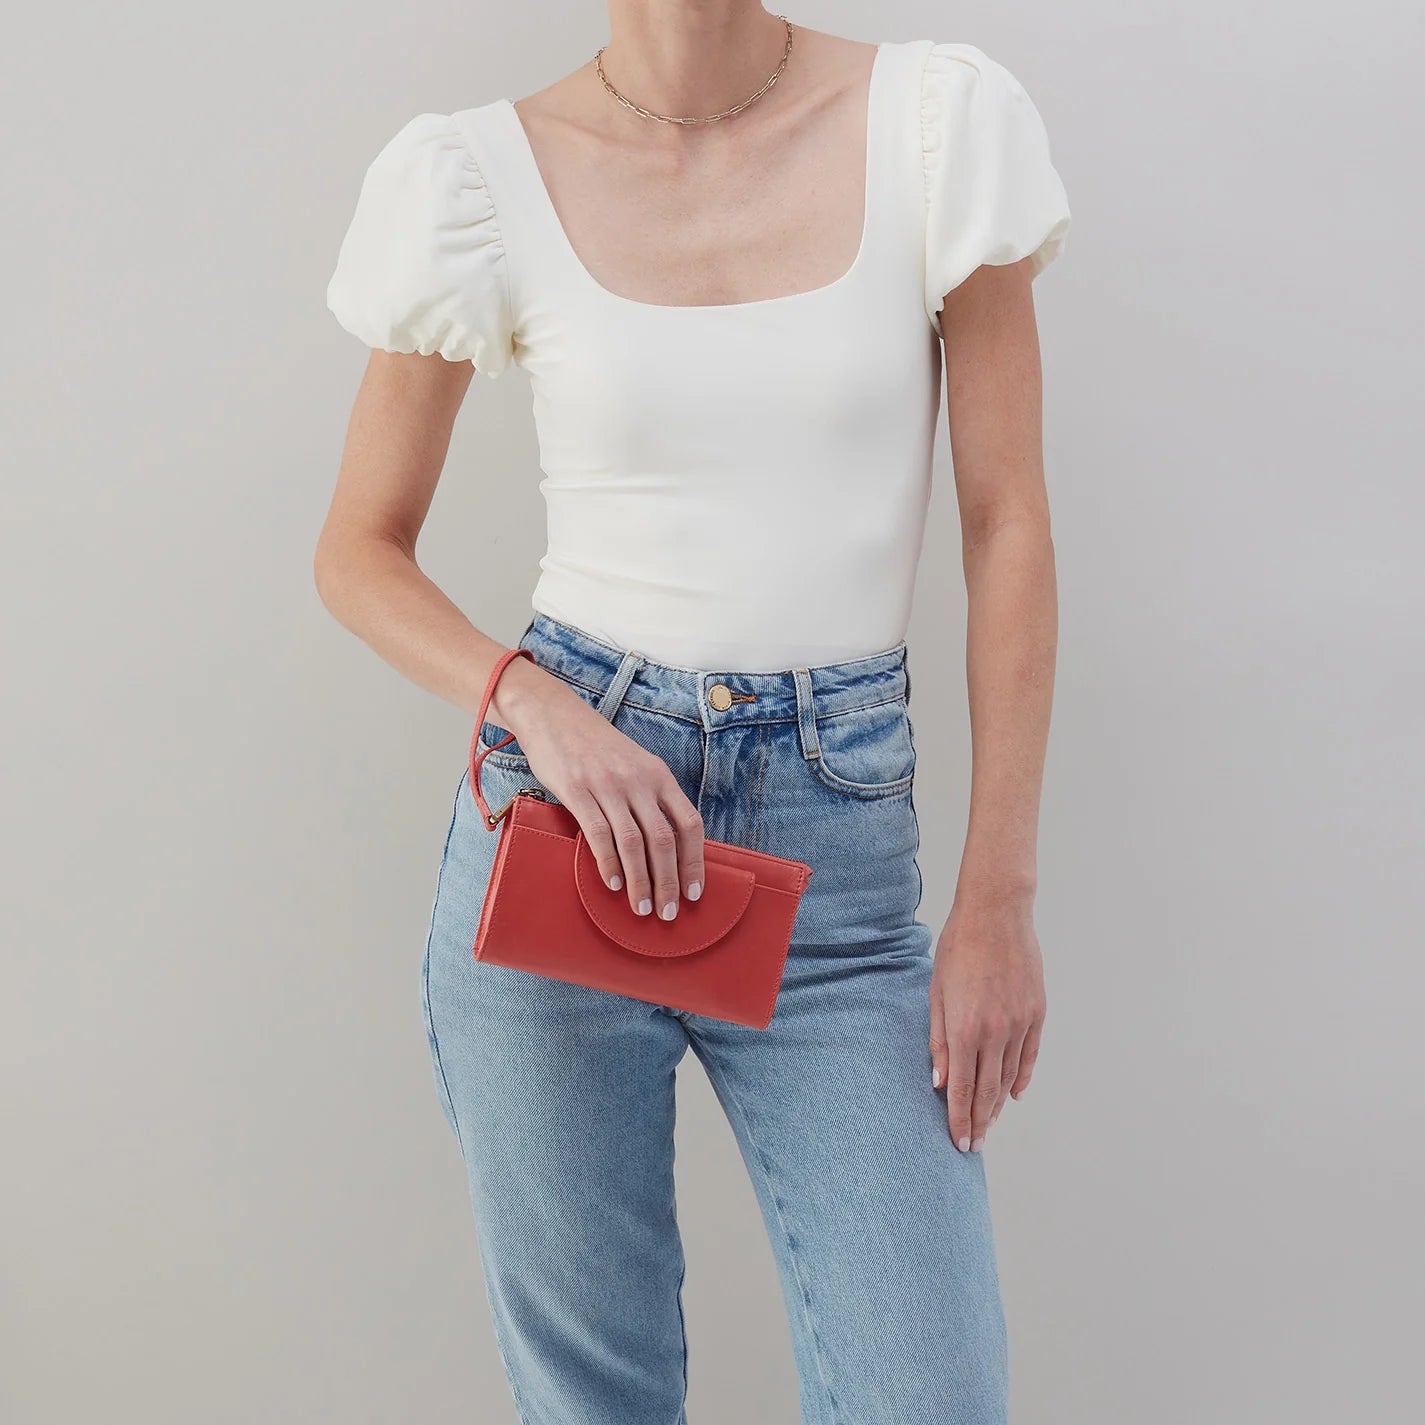 person wearing jeans and a white top holding cherry blossom zenith wristlet